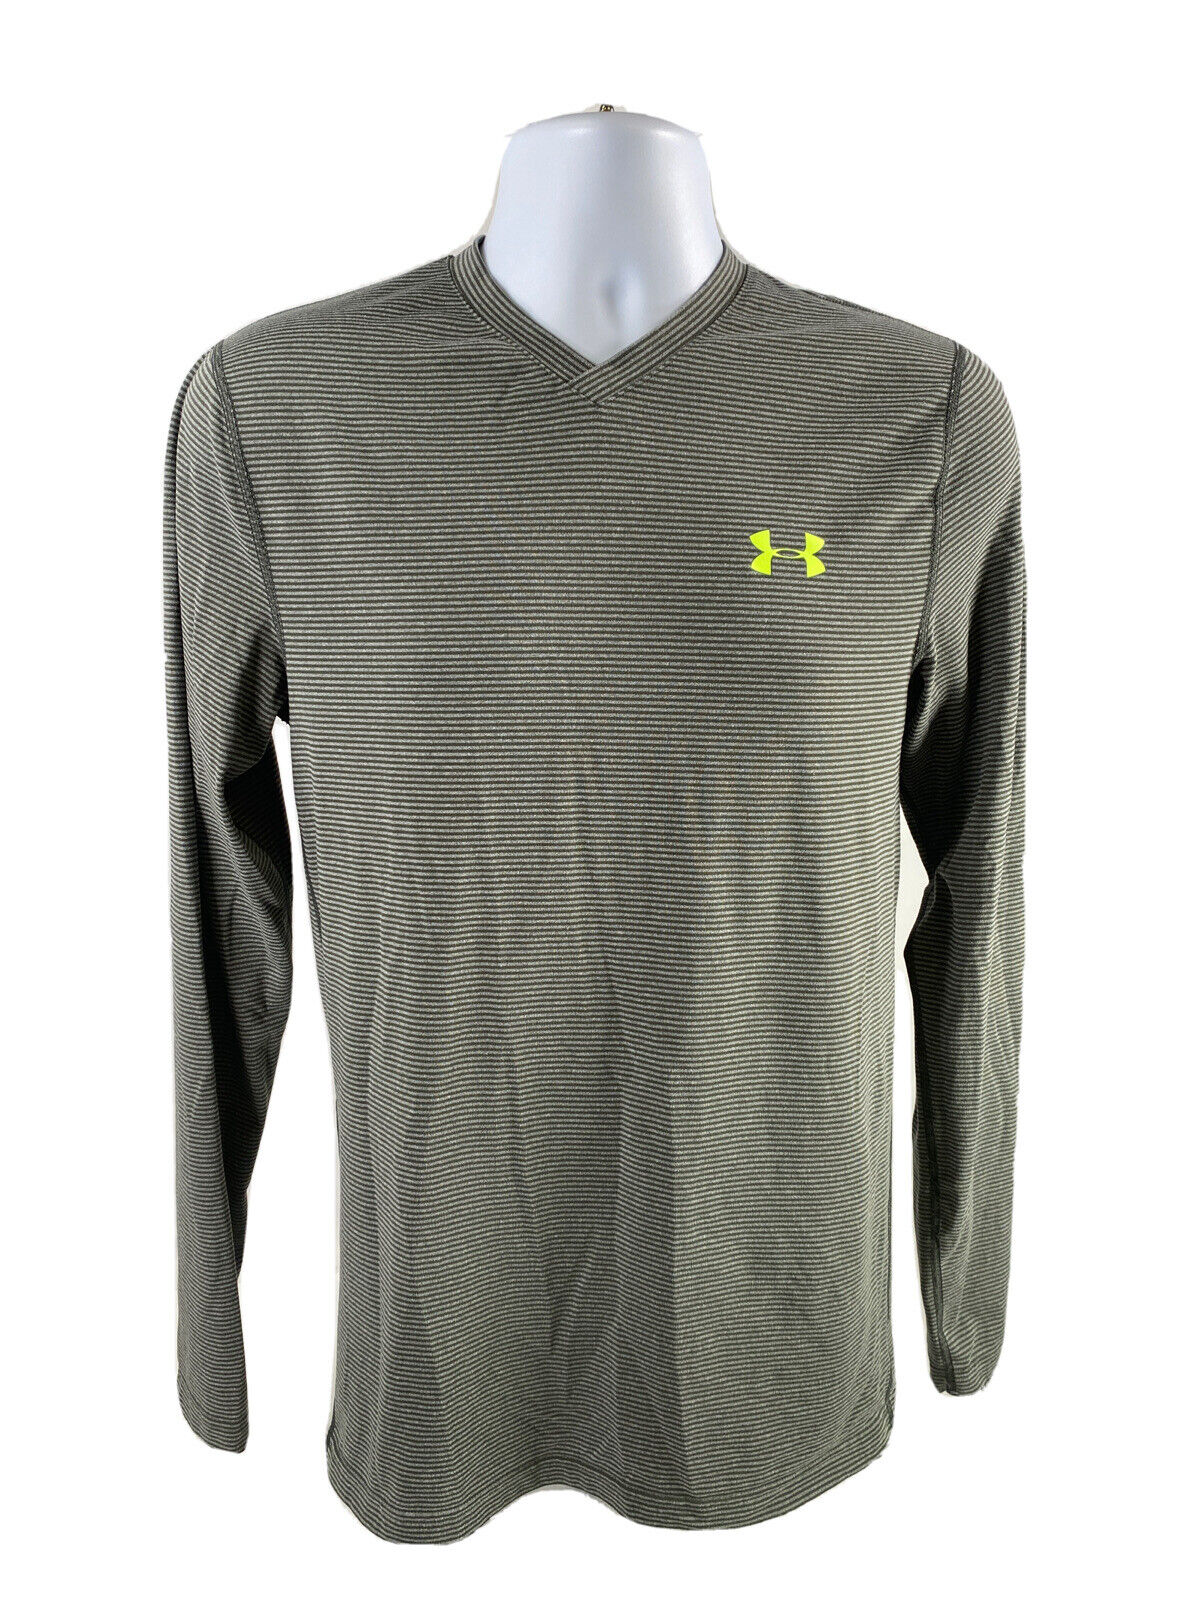 Under Armour Men's Green Striped Fitted ColdGear Athletic Shirt - S